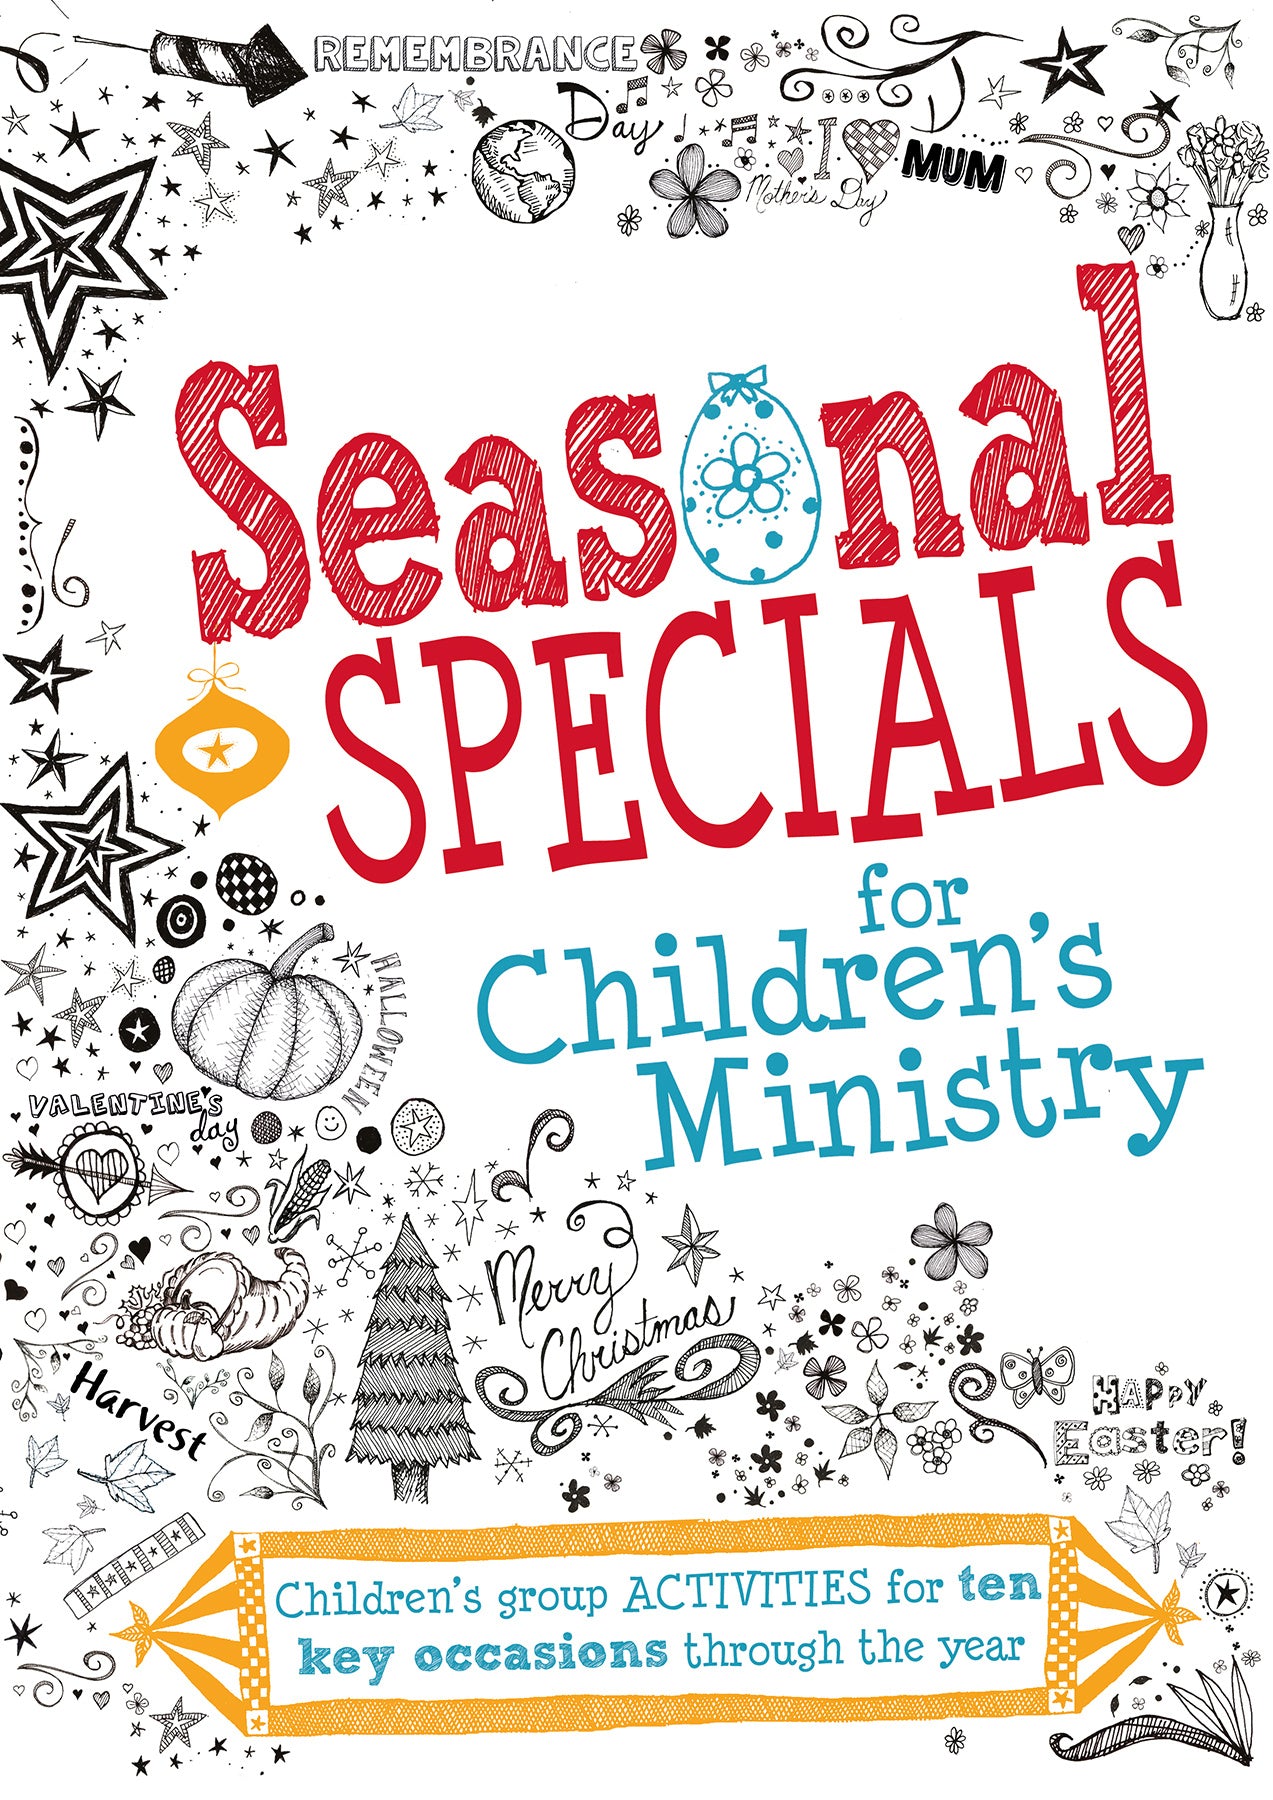 Image of Seasonal Specials for Children's Ministry other